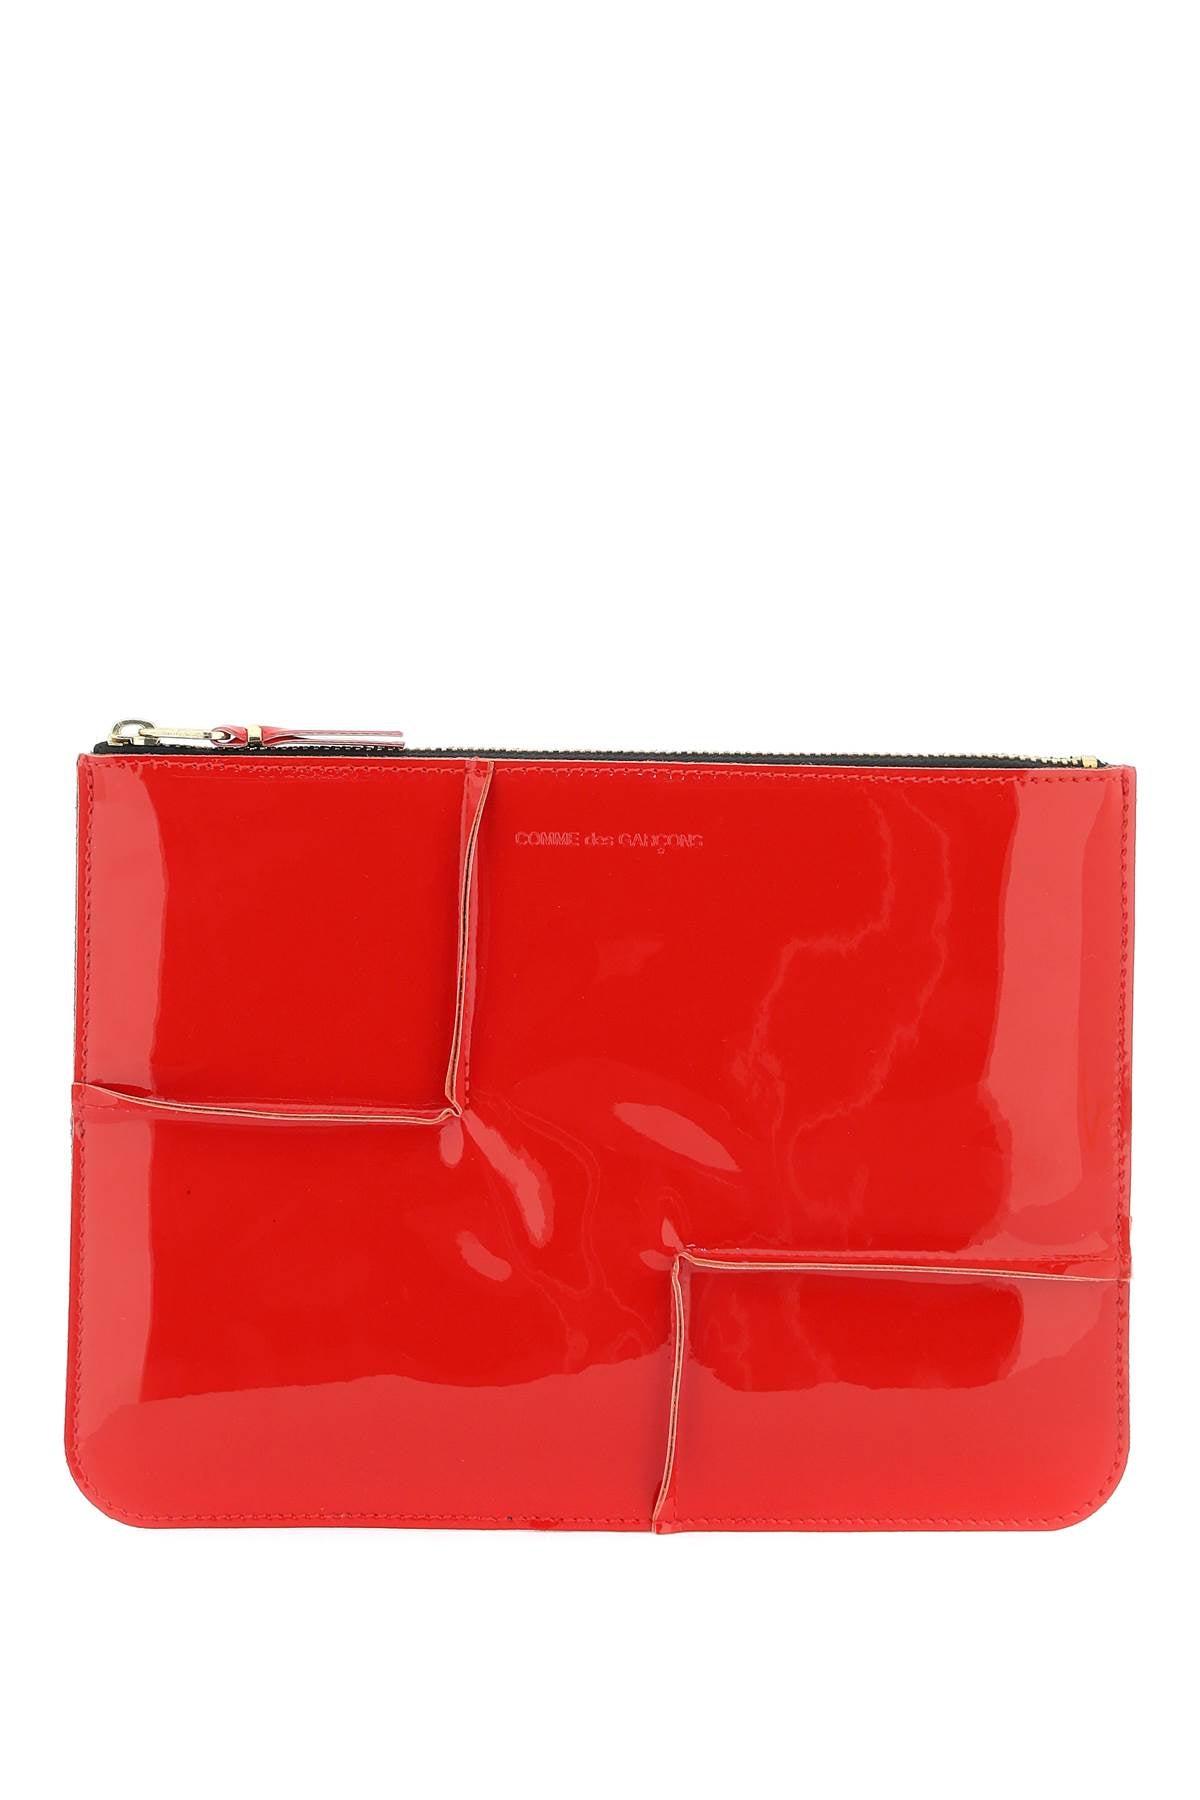 Comme des garcons wallet glossy patent leather-0